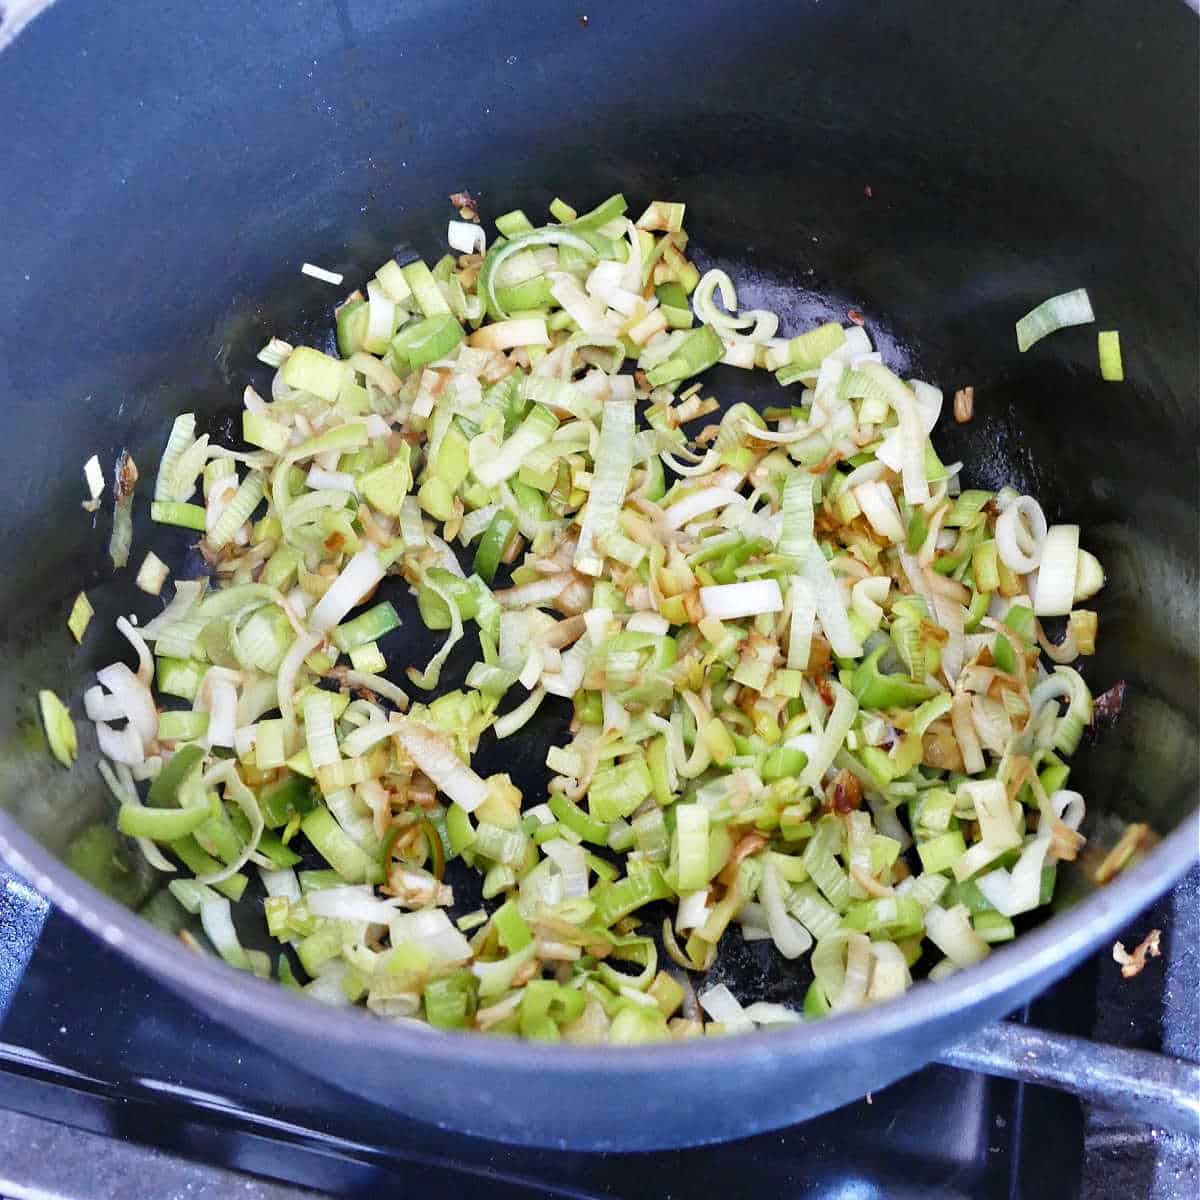 leeks cooking in a soup pot on a stove